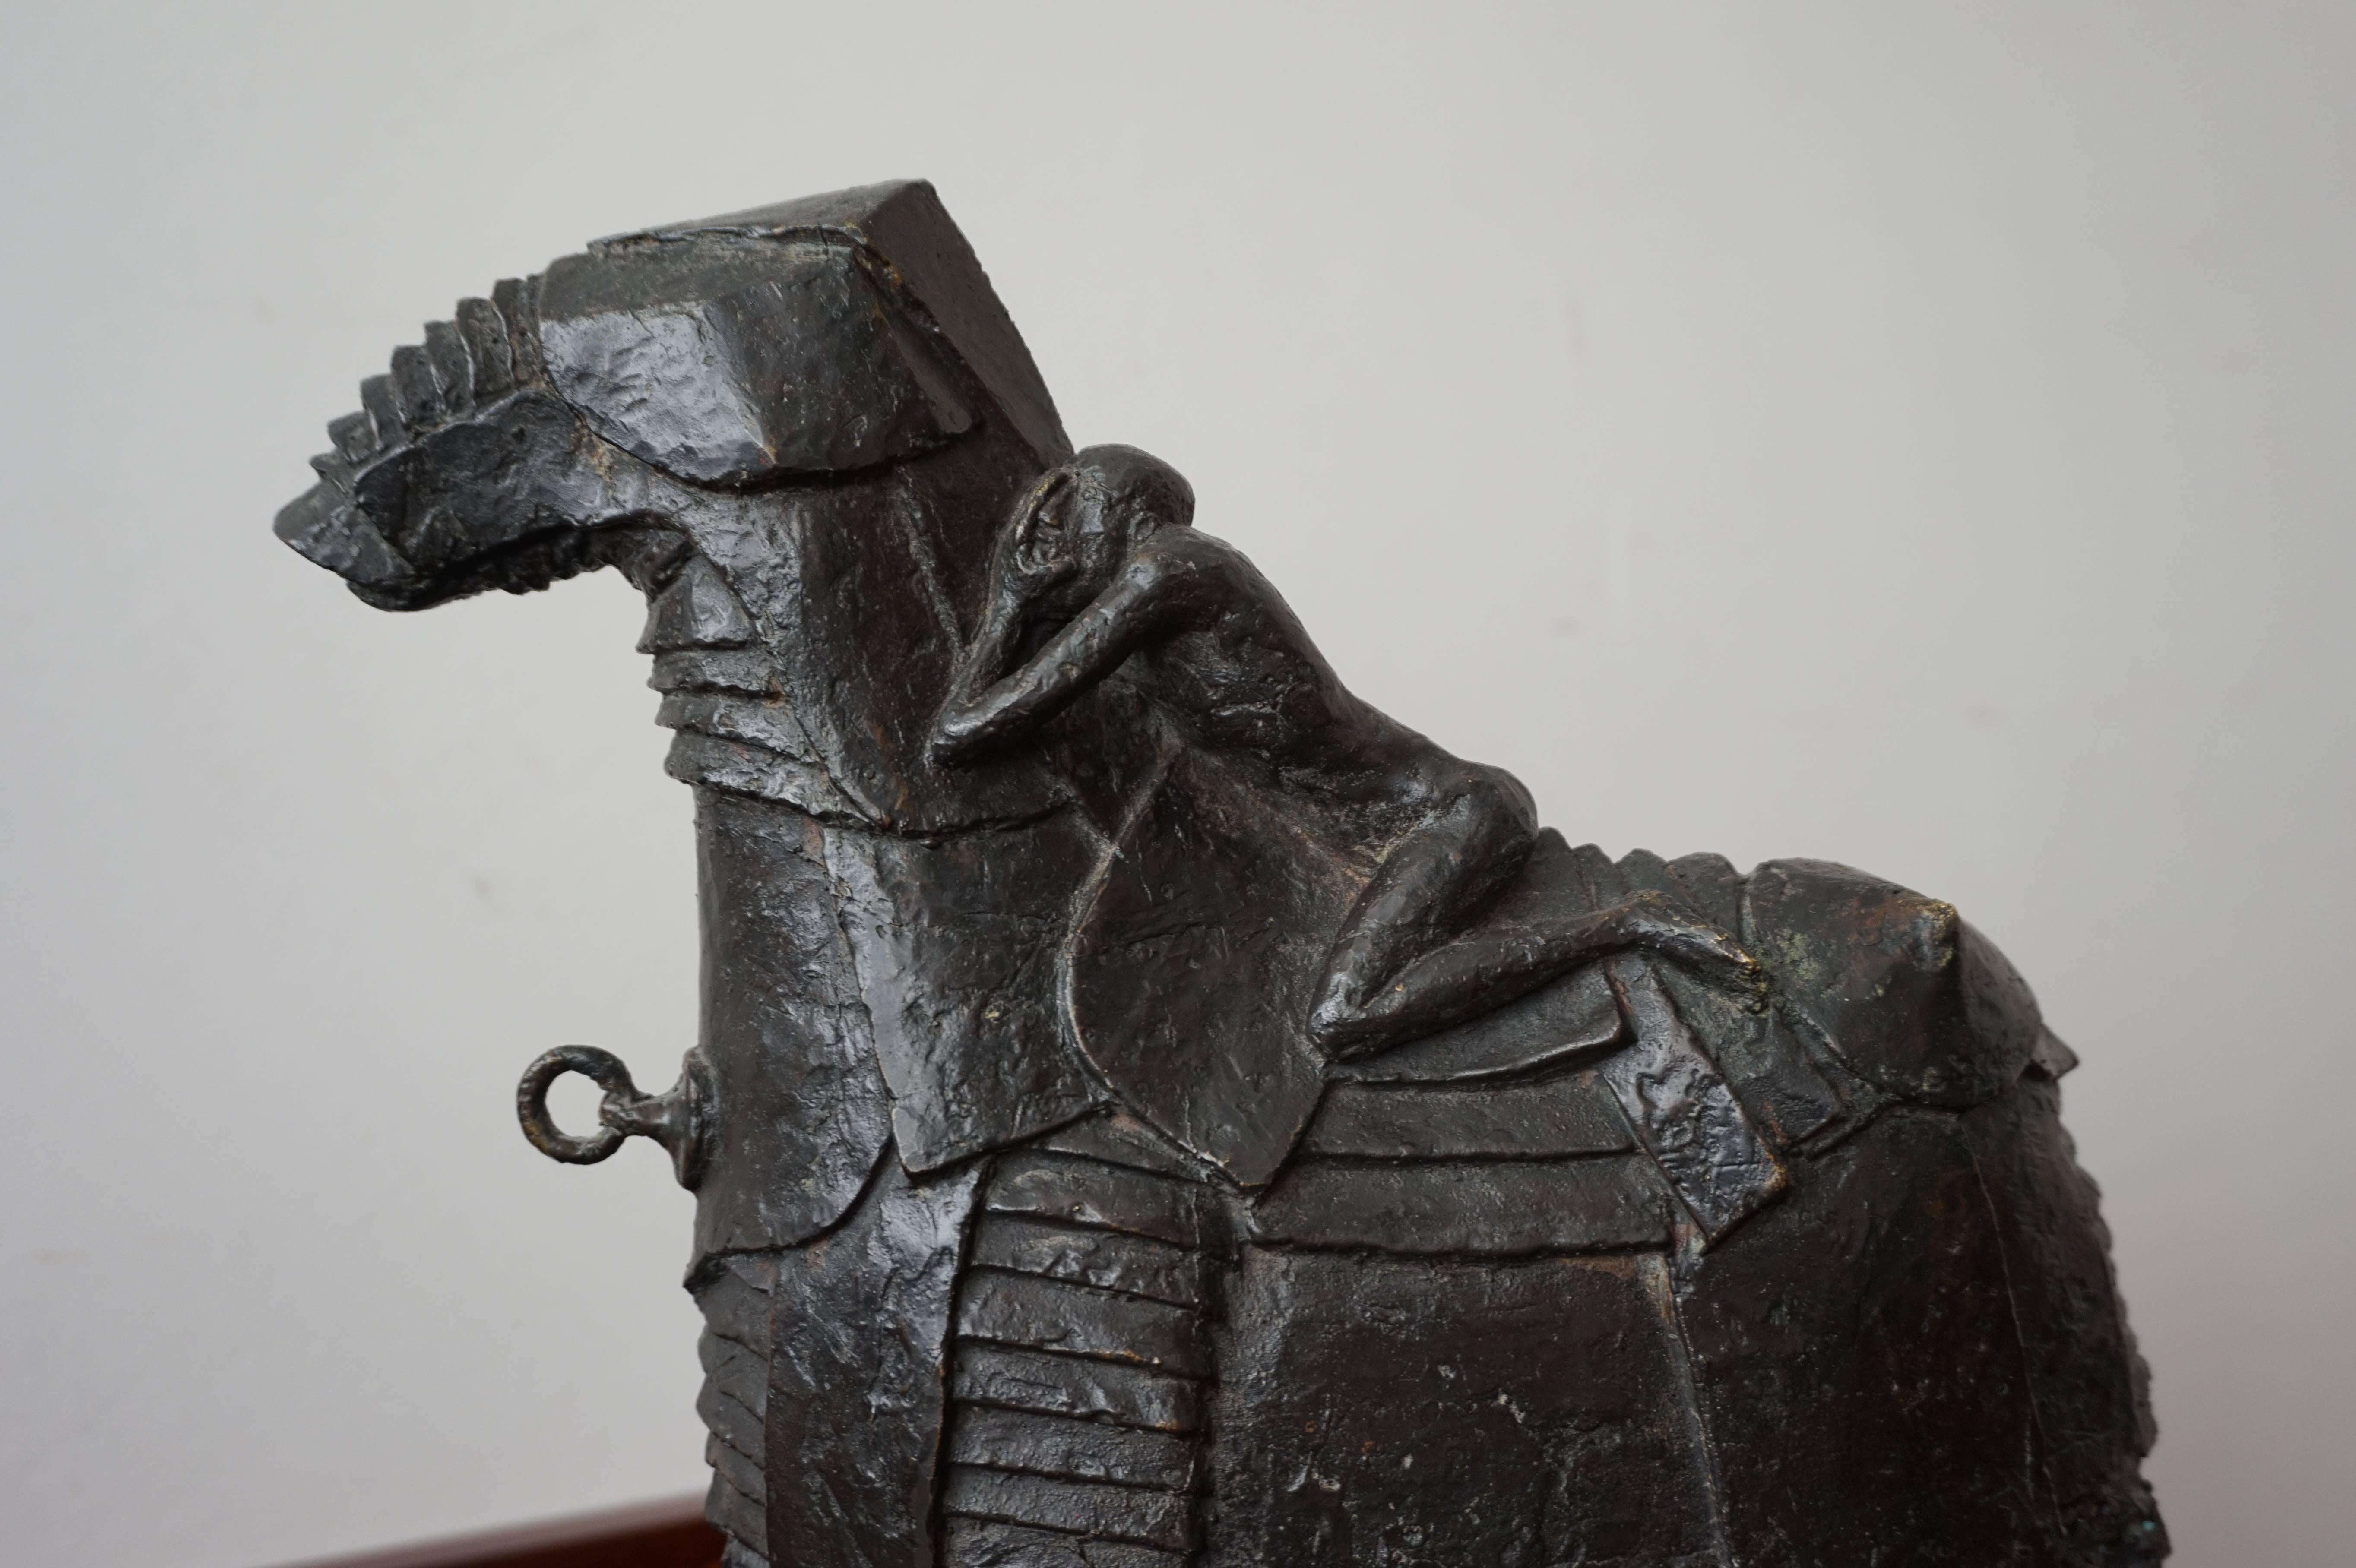 European Rare Bronze Sculpture of a Nude and Troubled Male on a Trojan like Armored Horse